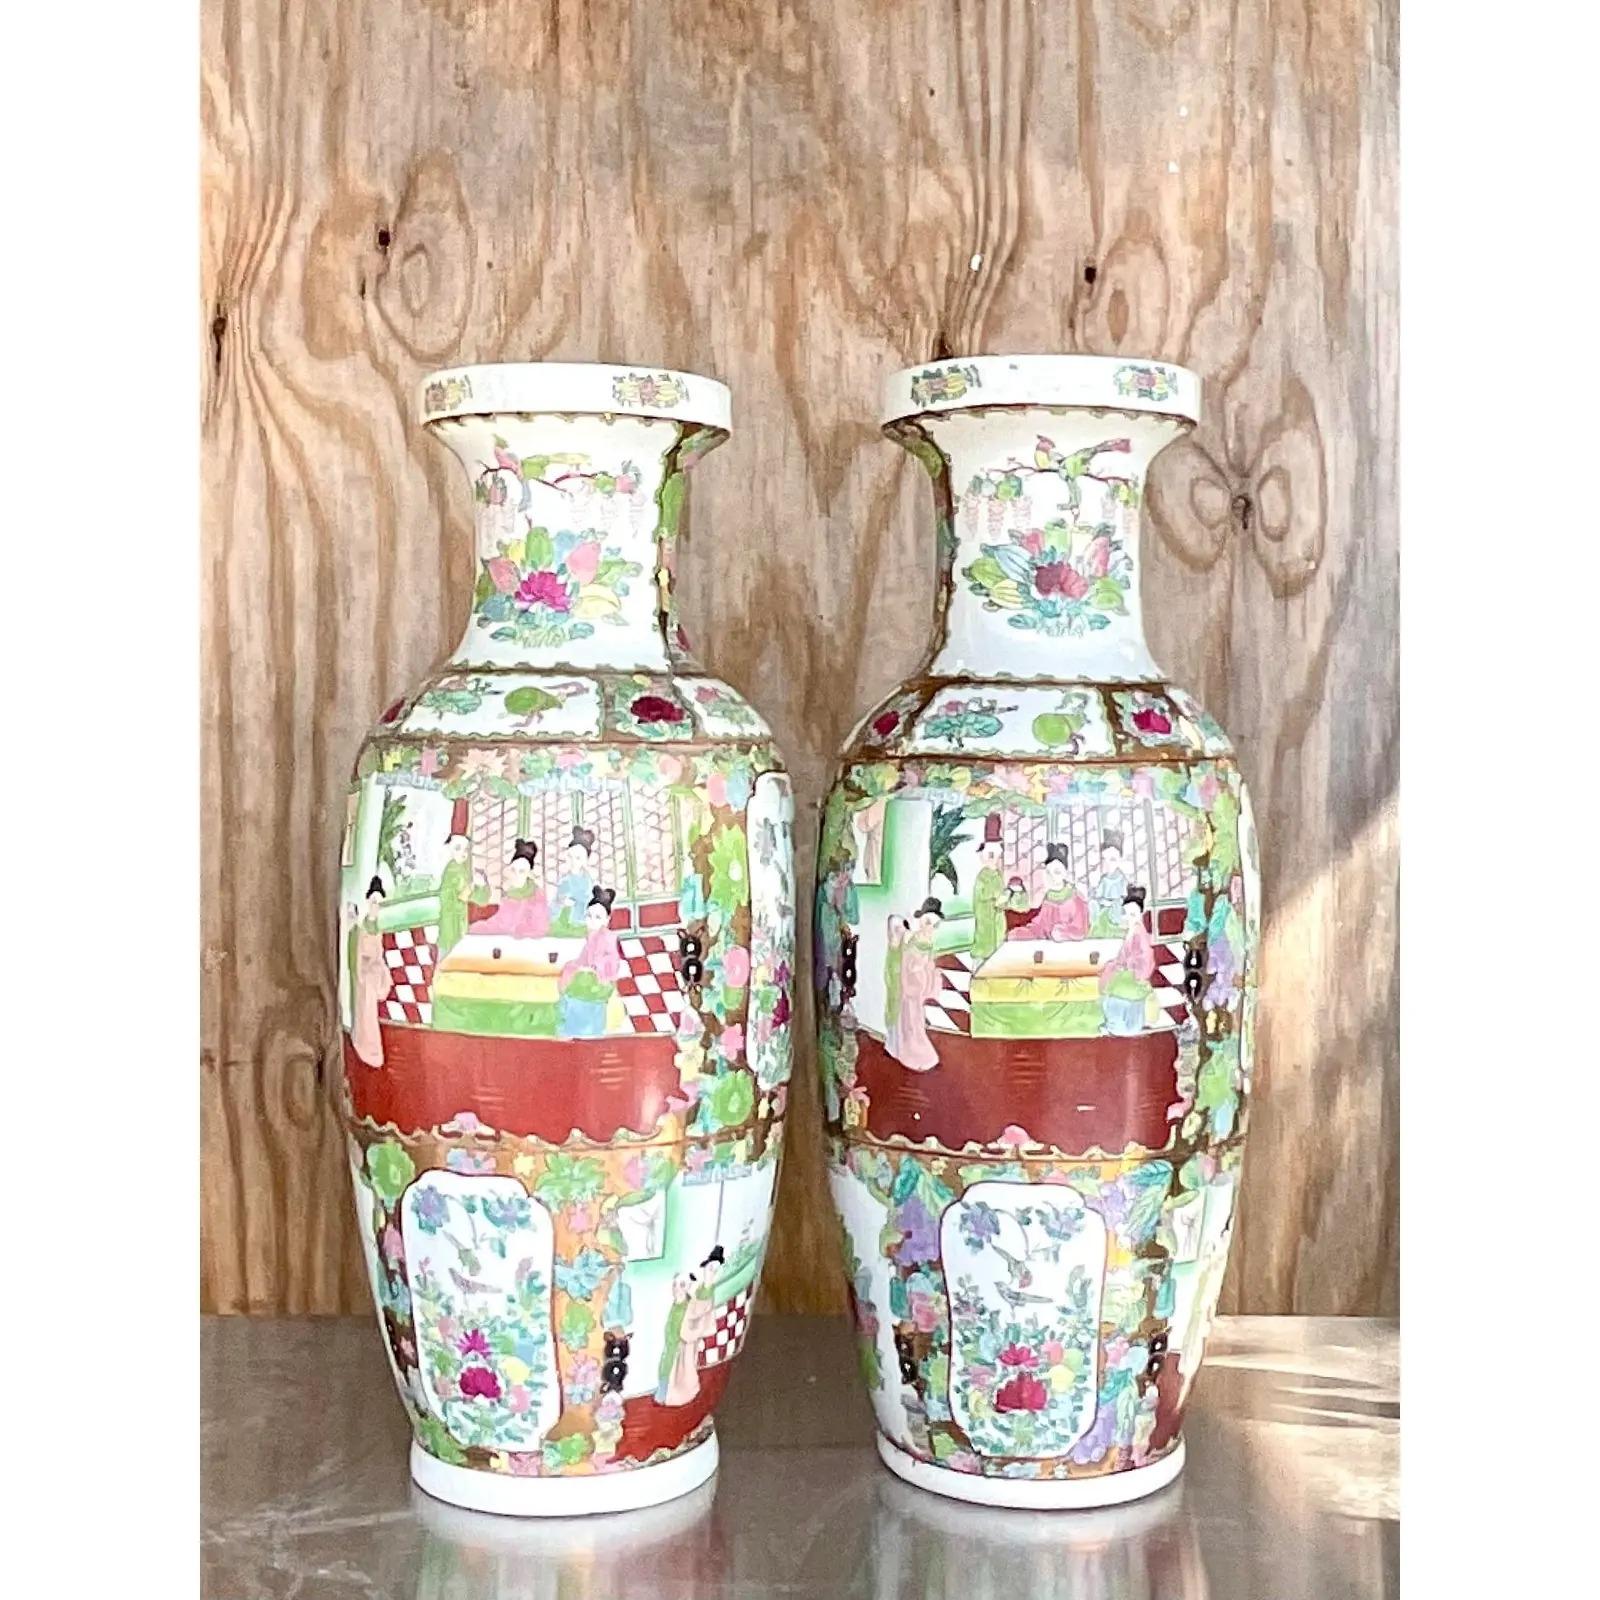 Fantastic pair of vintage Asian vases. The iconic Rose Medallion design in bright clear colors. Perfect as is, but would also make an amazing large pair of lamps. Acquired from a Palm Beach estate.